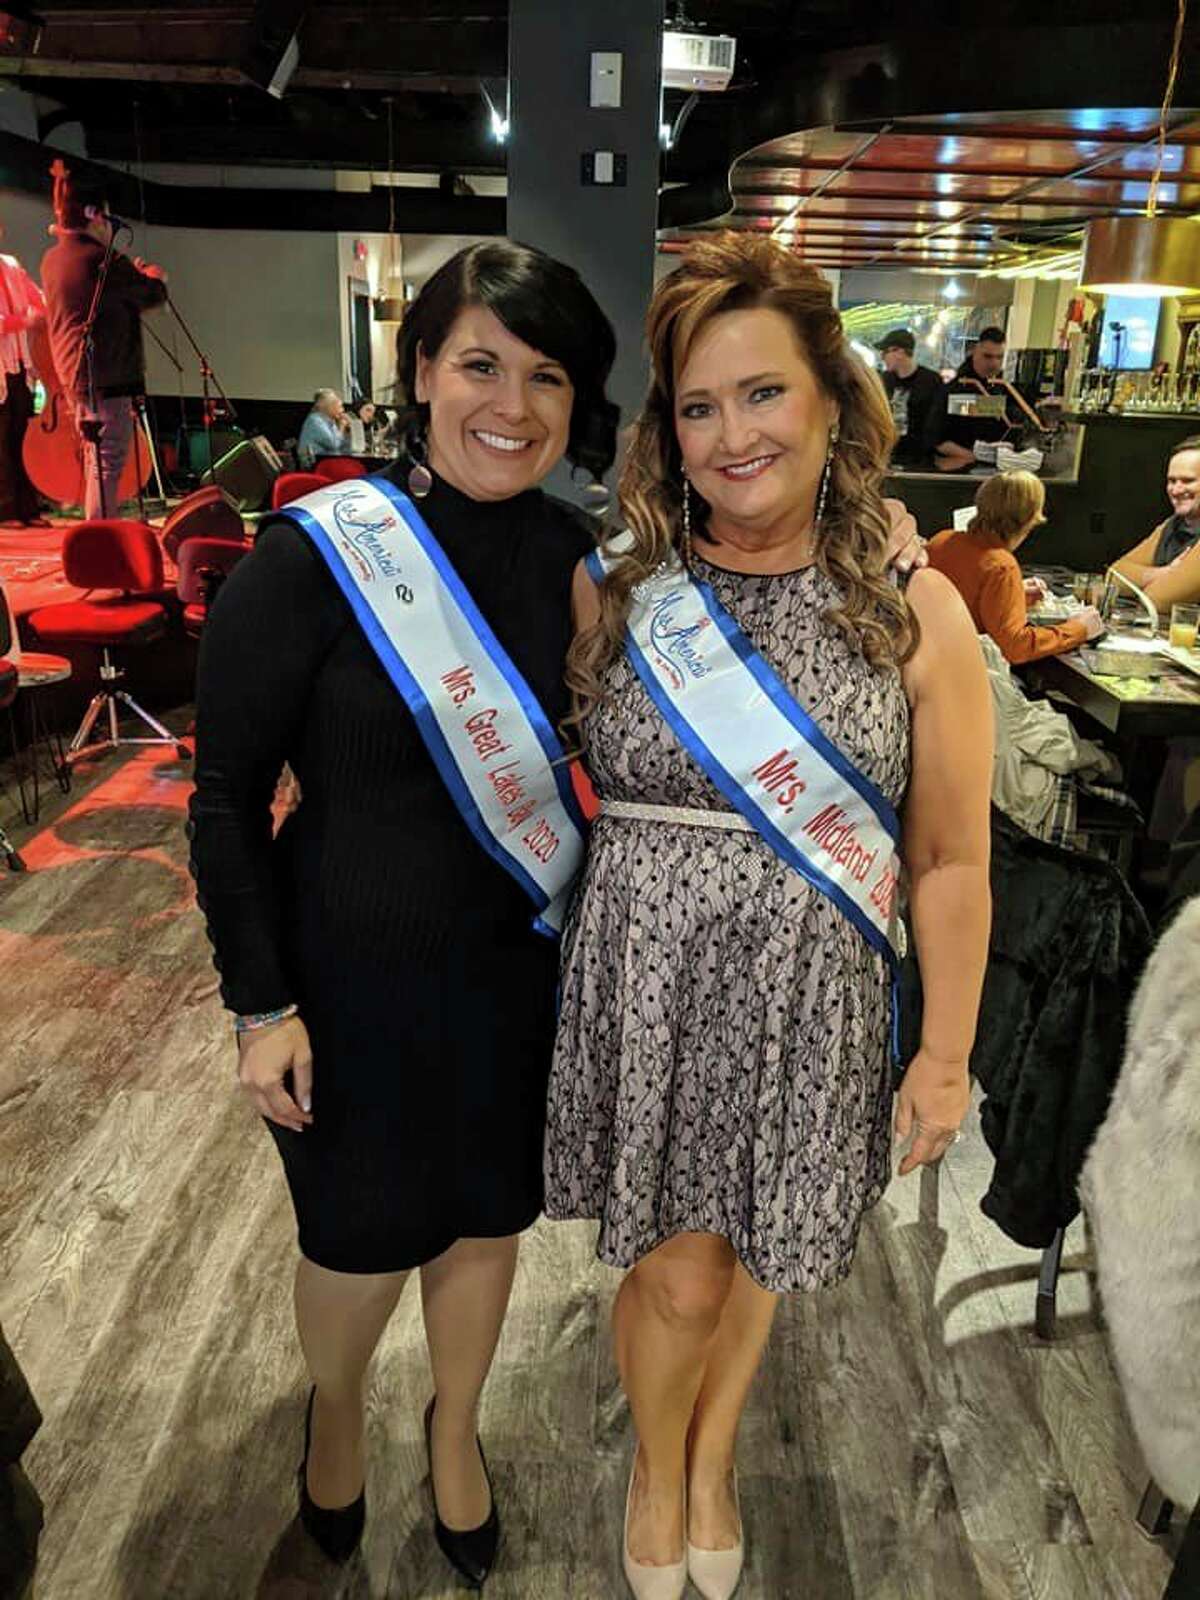 Abby L. Scherzer of Midland, left, and Lisa Miner, Mrs. Midland, both competed in the Mrs. Great Lakes Bay pageant March 7. Scherzer received two awards: Mrs. Congeniality and the Pageant Ambassador Award.. (Photo provided)